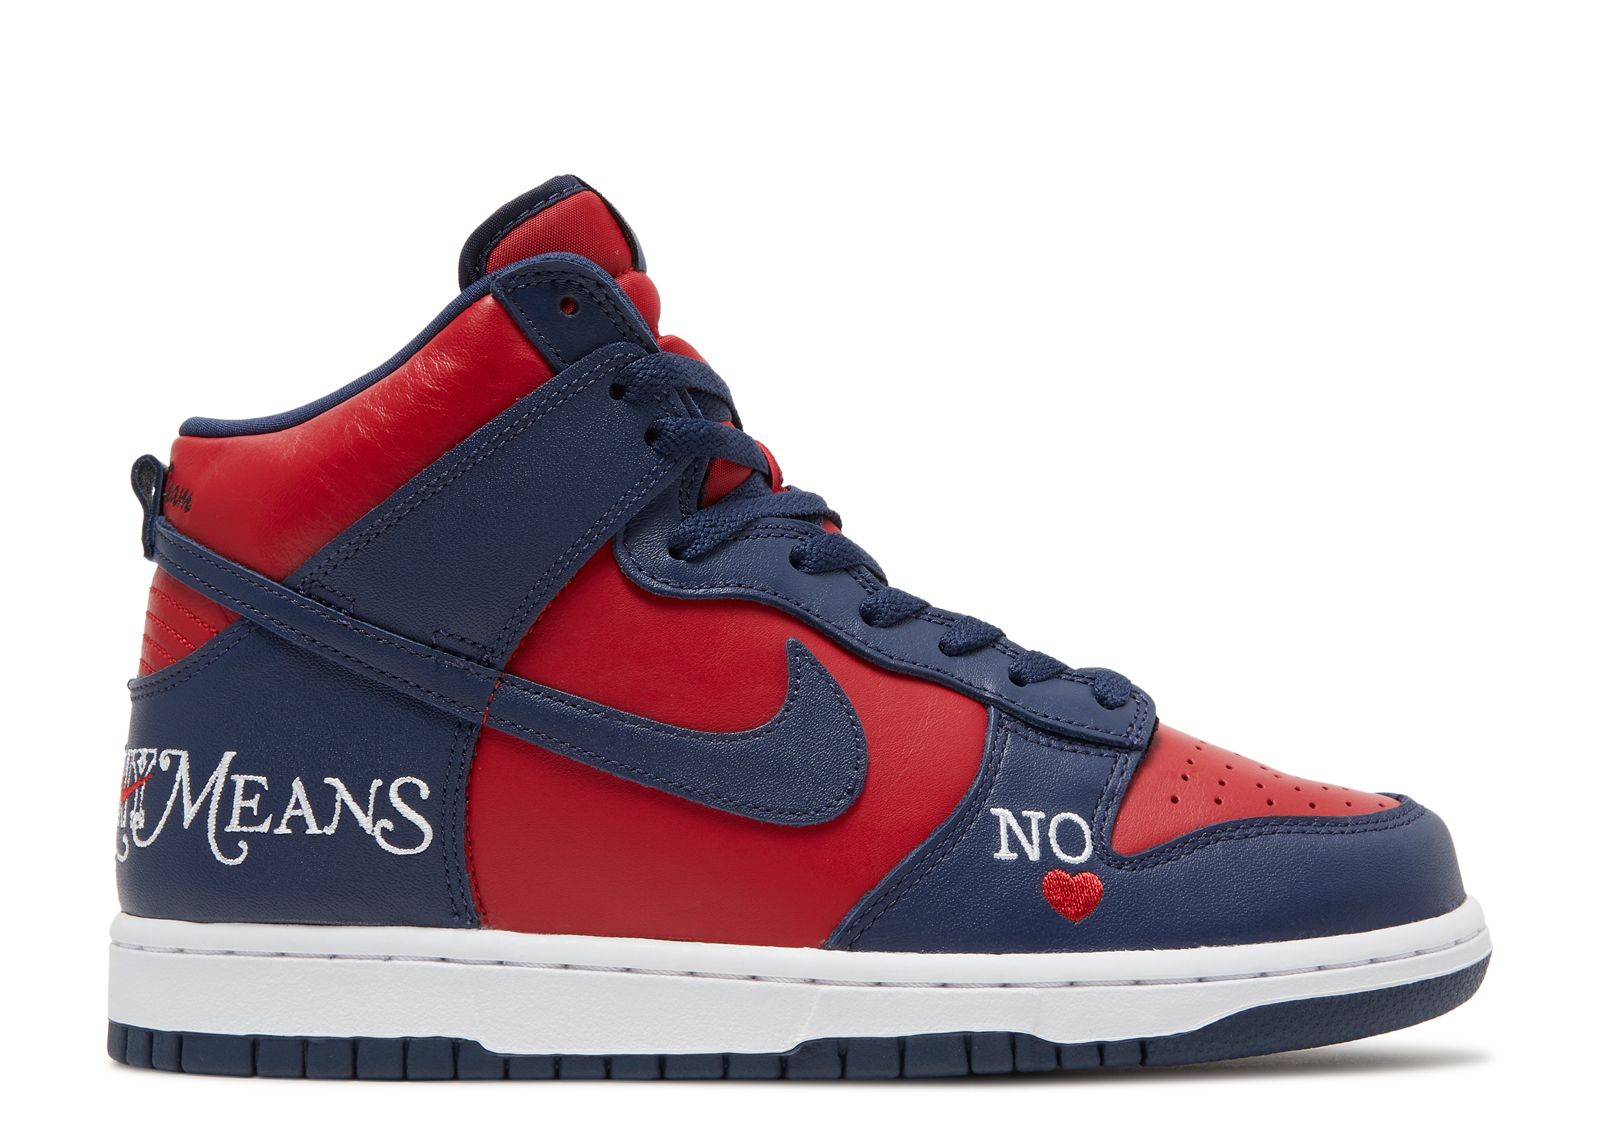 Supreme x Dunk High SB 'By Any Means - Red Navy'